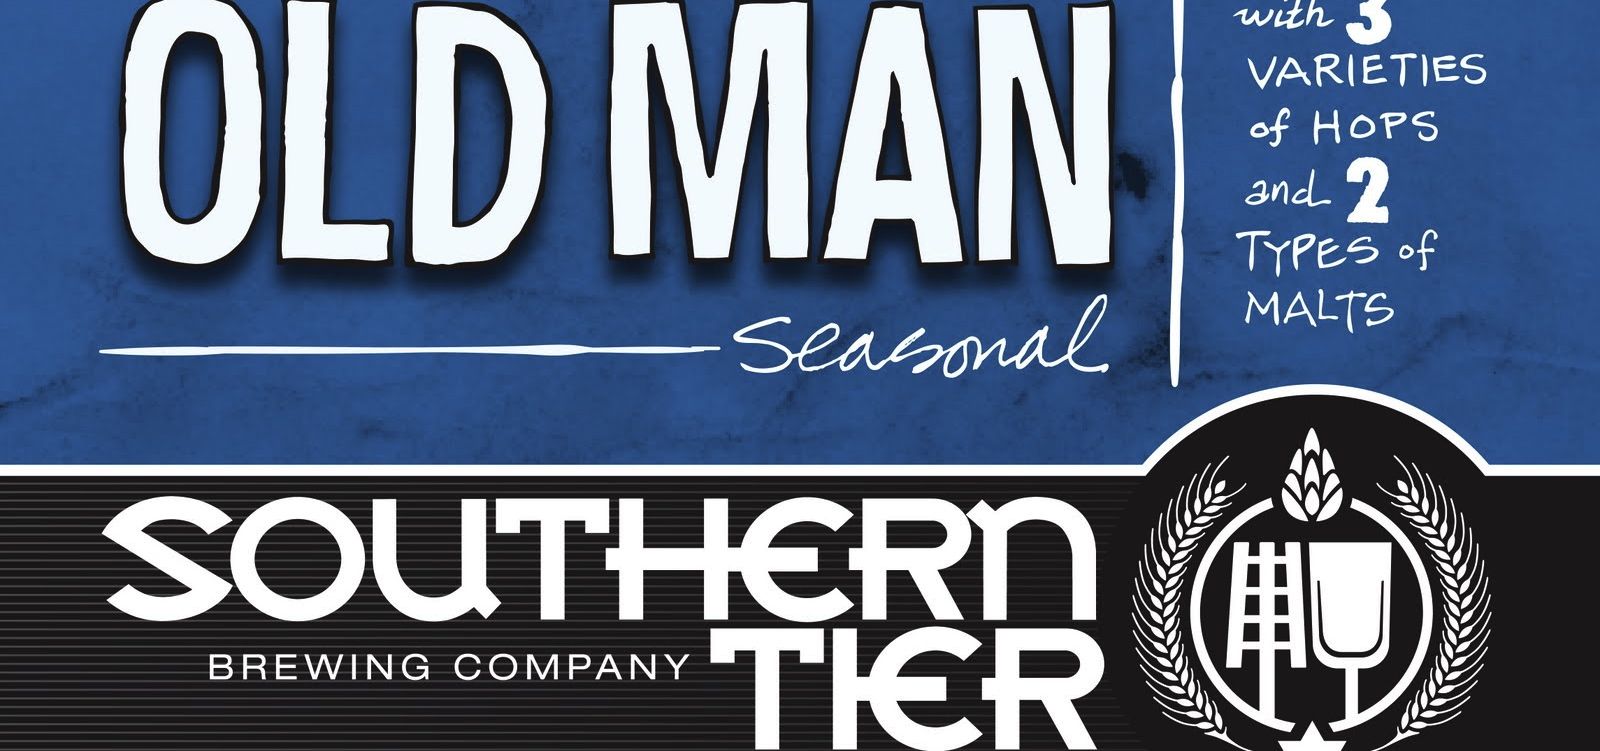 Southern Tier Brewing Company- Old Man Winter Ale